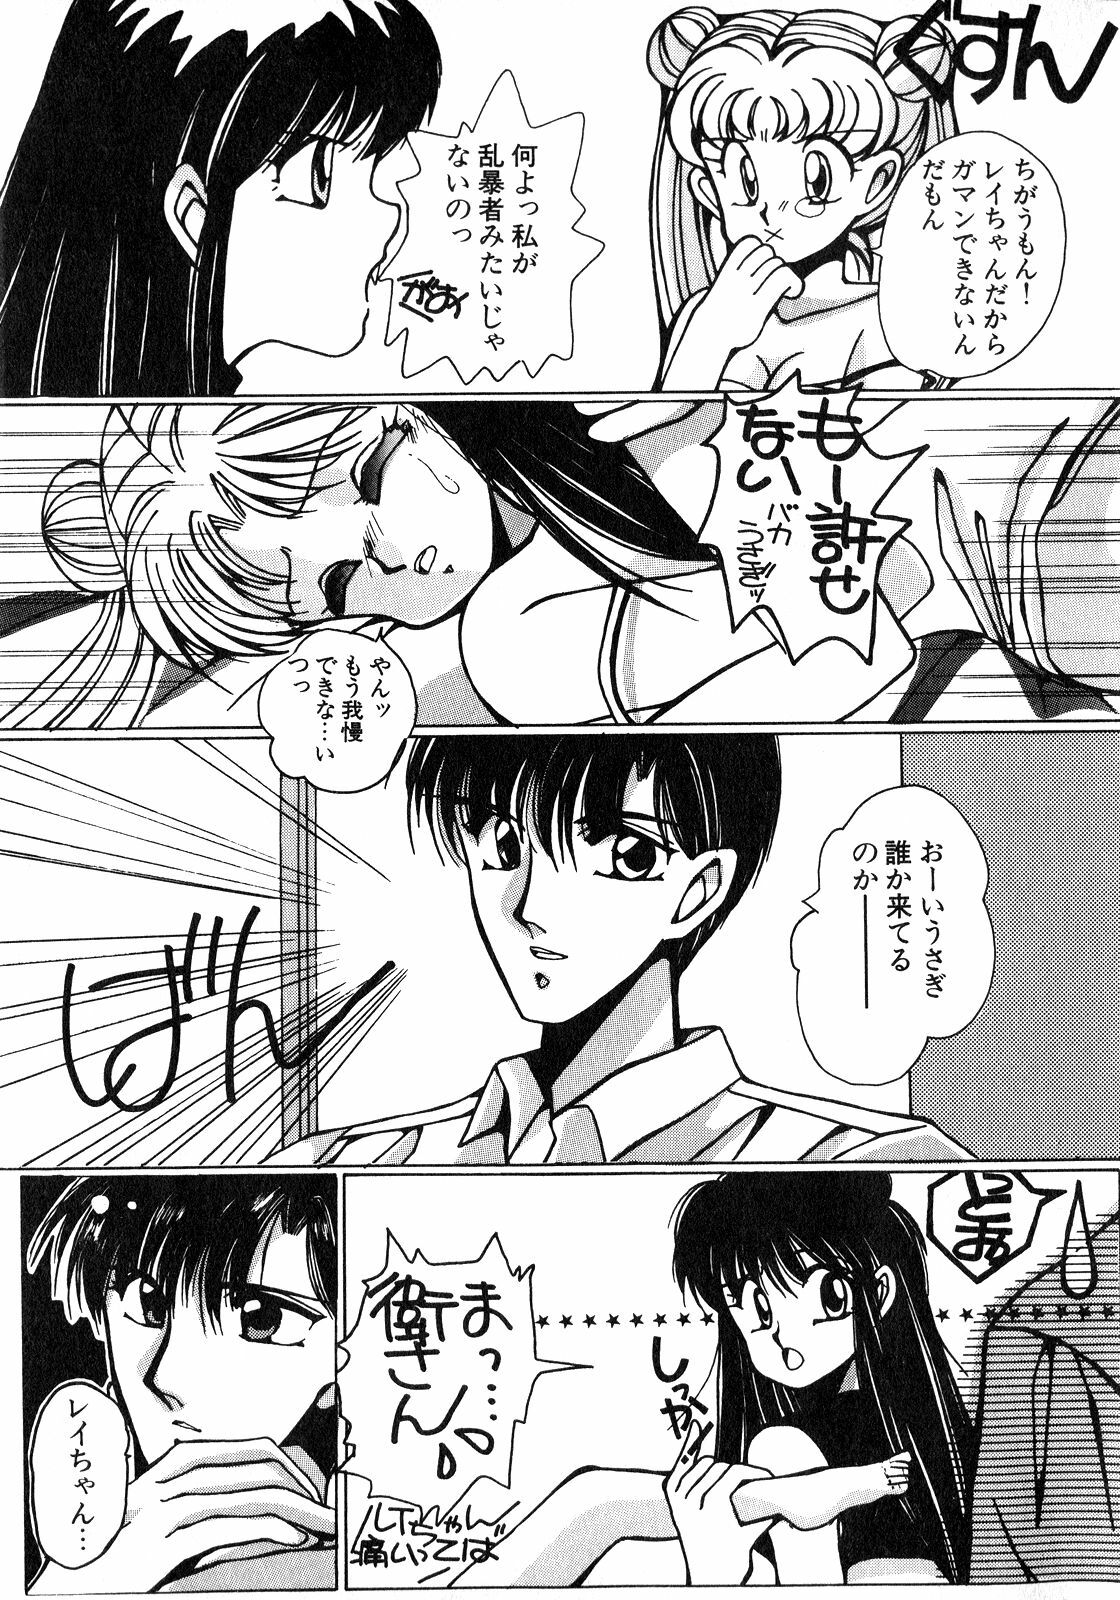 [Anthology] Lunatic Party 8 (Sailor Moon) page 44 full